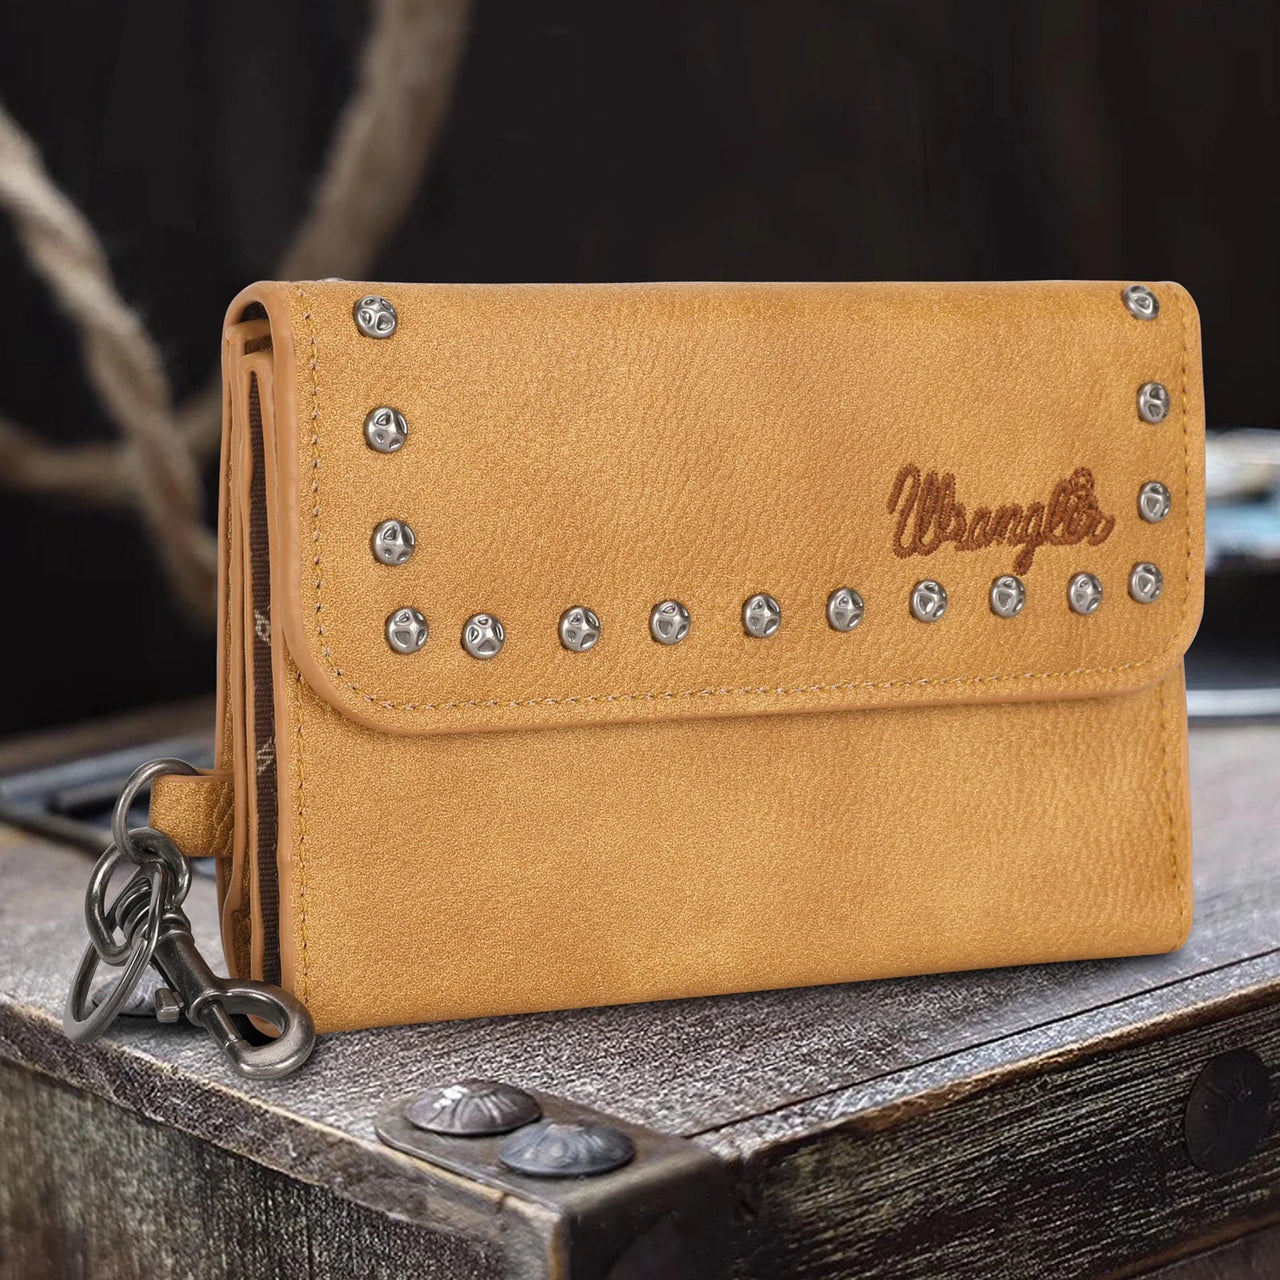 Wrangler Women's Studded Accents Tri-Fold Keychain Wallet - Light Brown